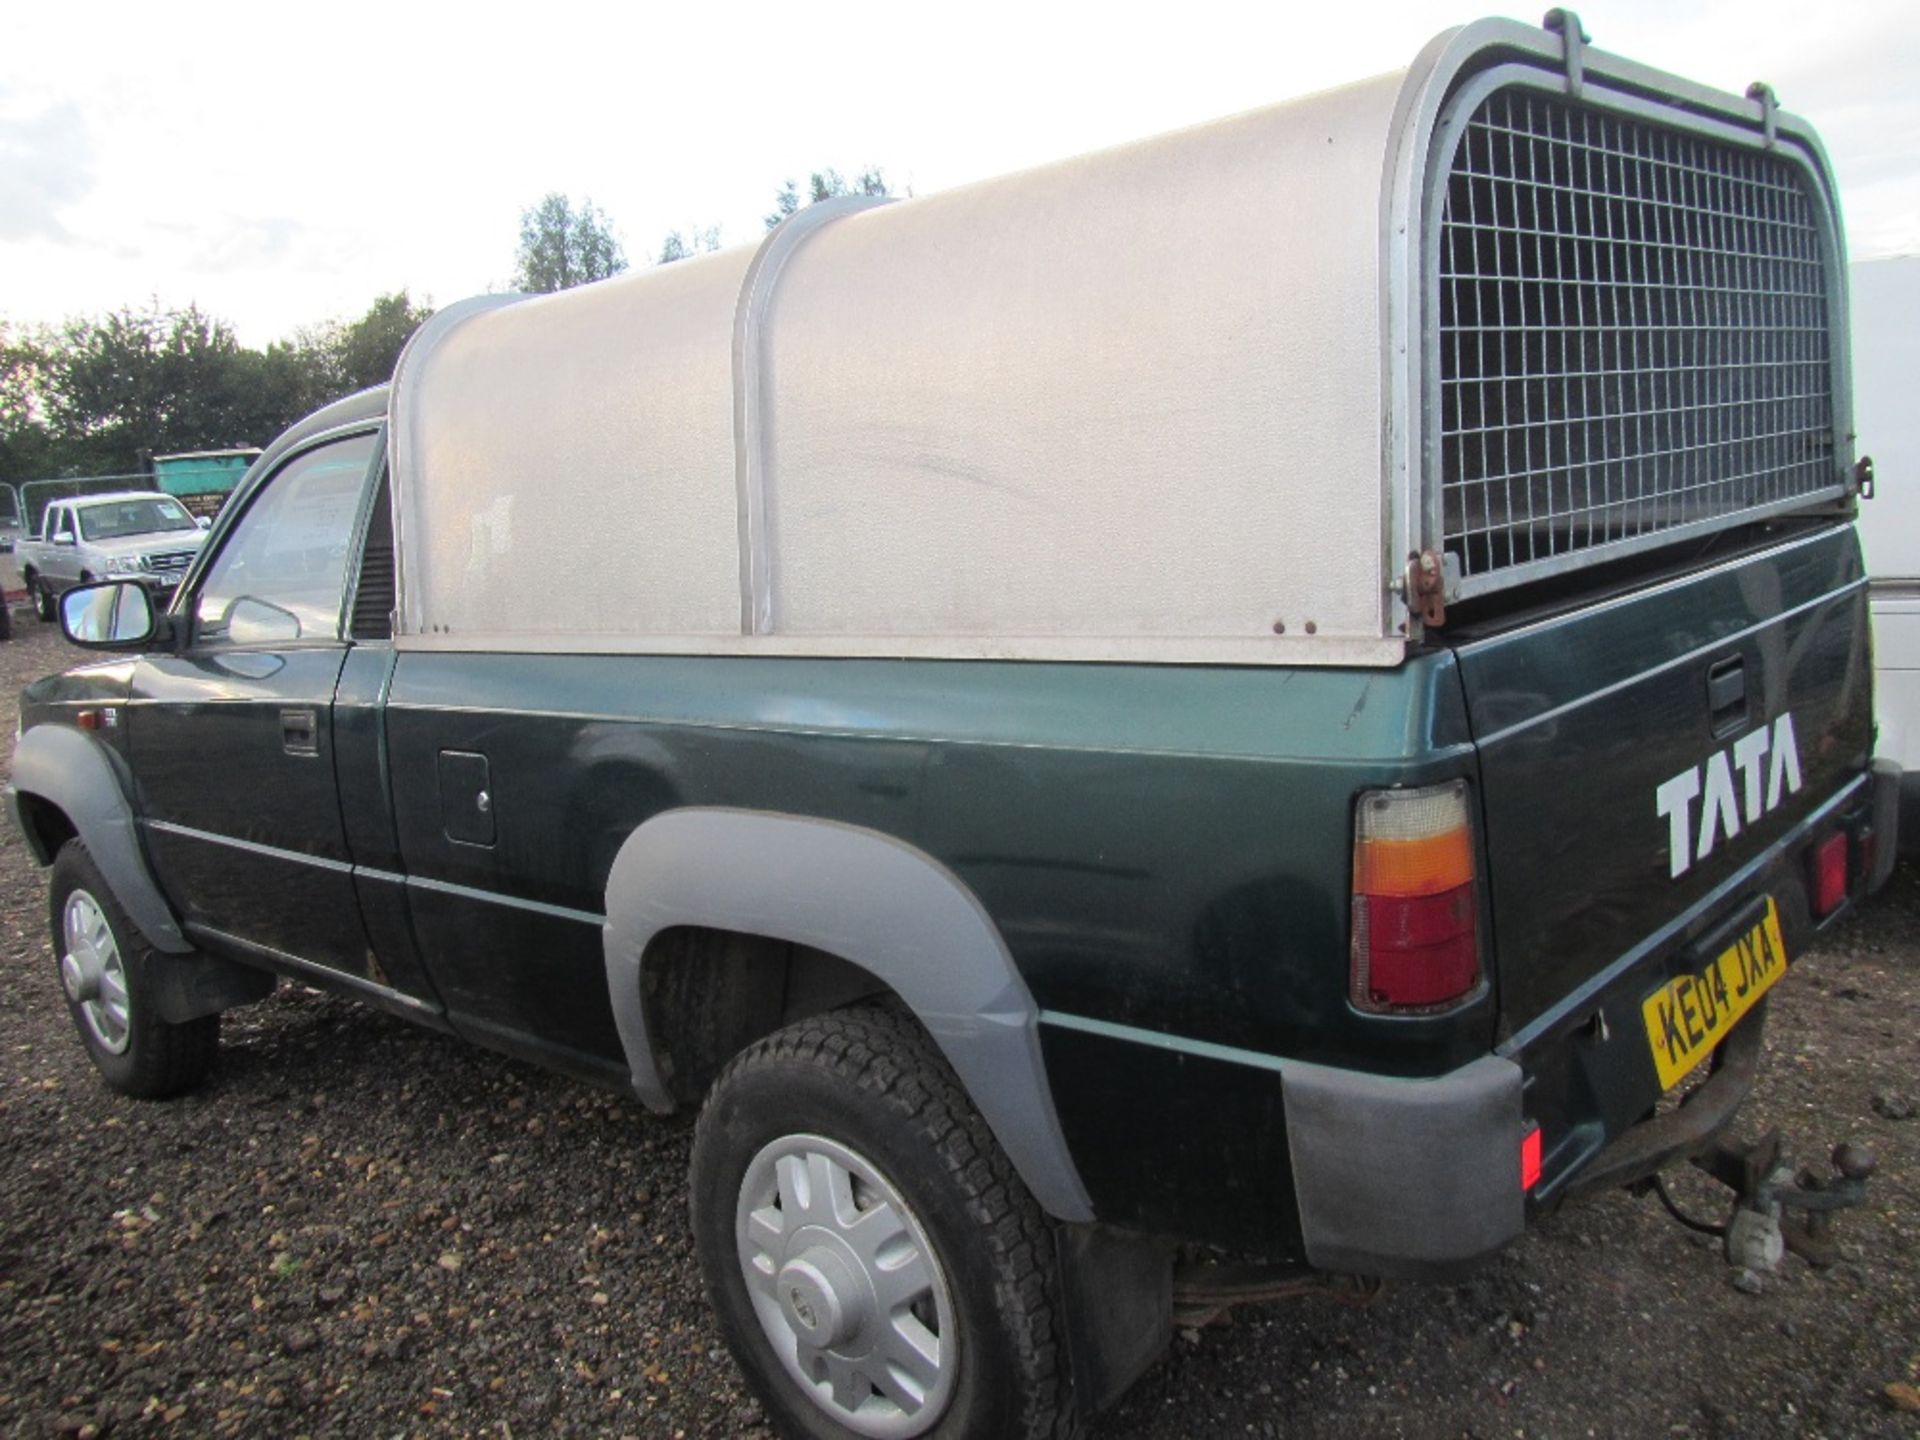 Tata TL2 SWB Pick Up. Registration Documents will be supplied. Mileage: 62,133. No MOT. Reg. No. - Image 7 of 7